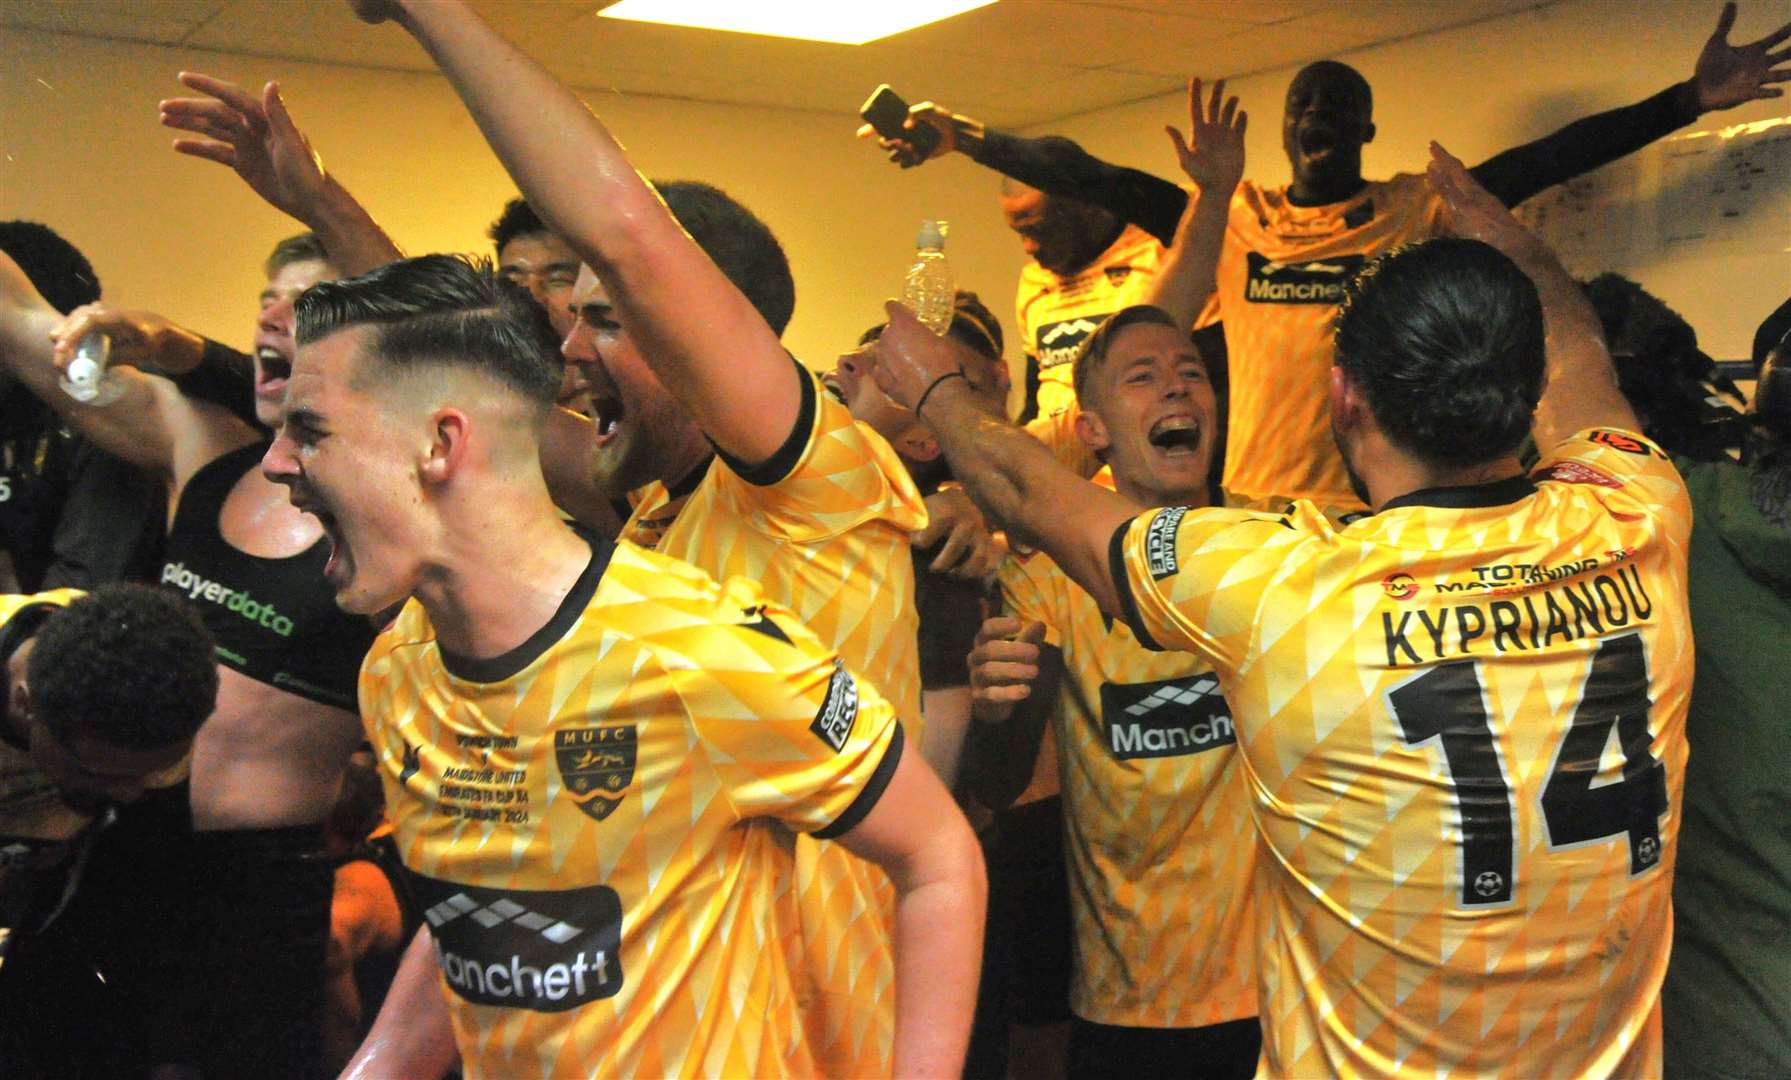 Post-match celebrations inside the Maidstone dressing room after they beat Ipswich Town in the FA Cup Fourth Round. Picture: Steve Terrell